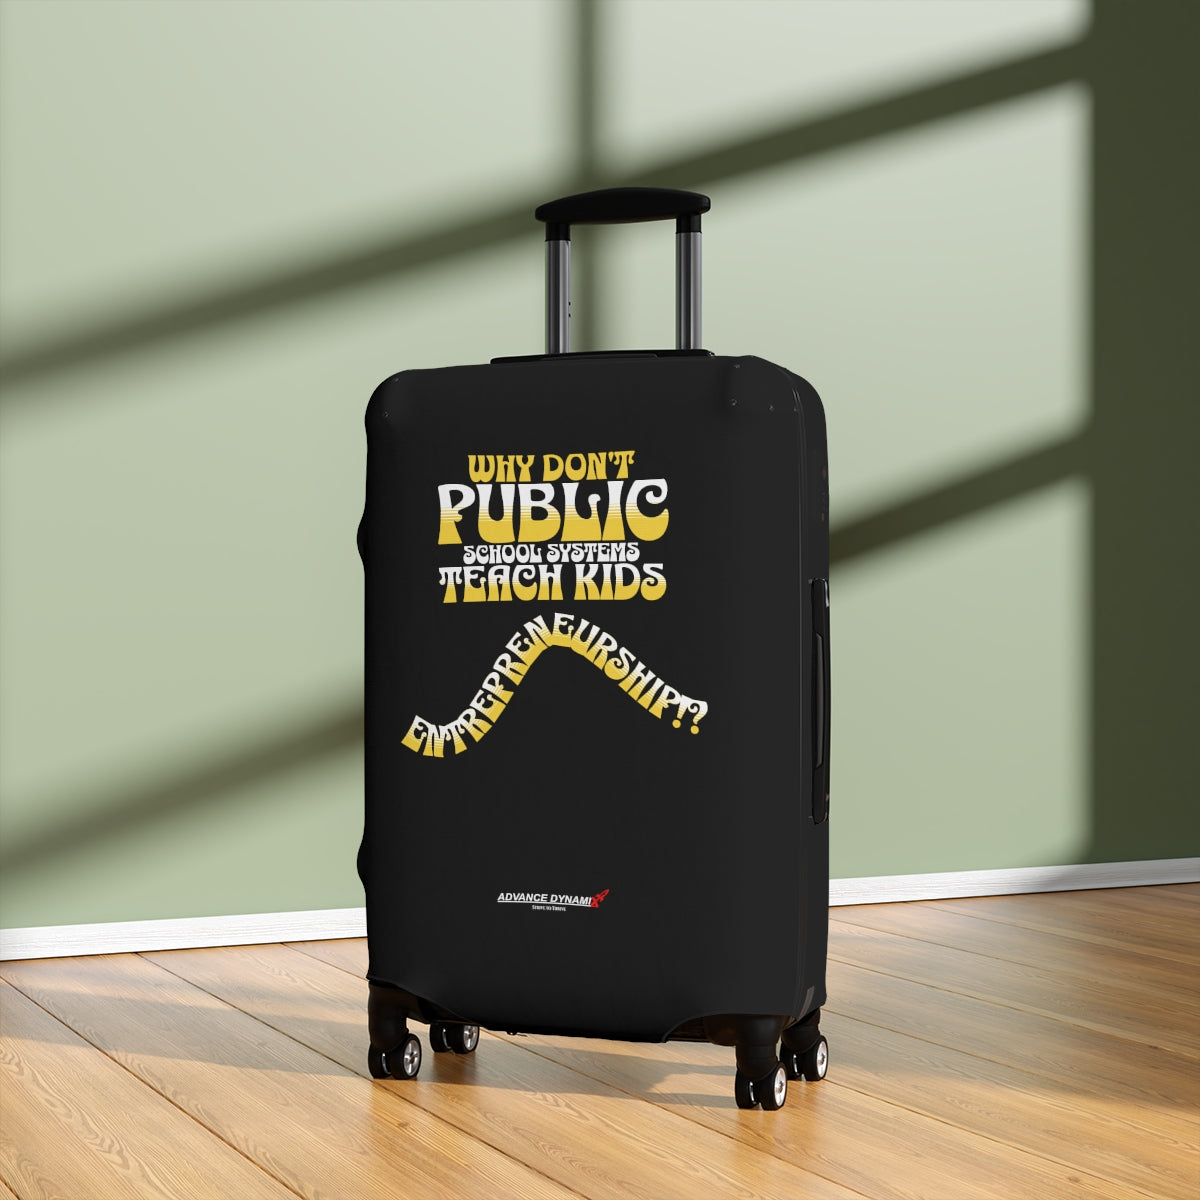 Why Don't Public School Systems Teach Kids Entrepreneurship? - Luggage Covers Infused with Advance Dynamix Add-A-Tude - Tell the world!